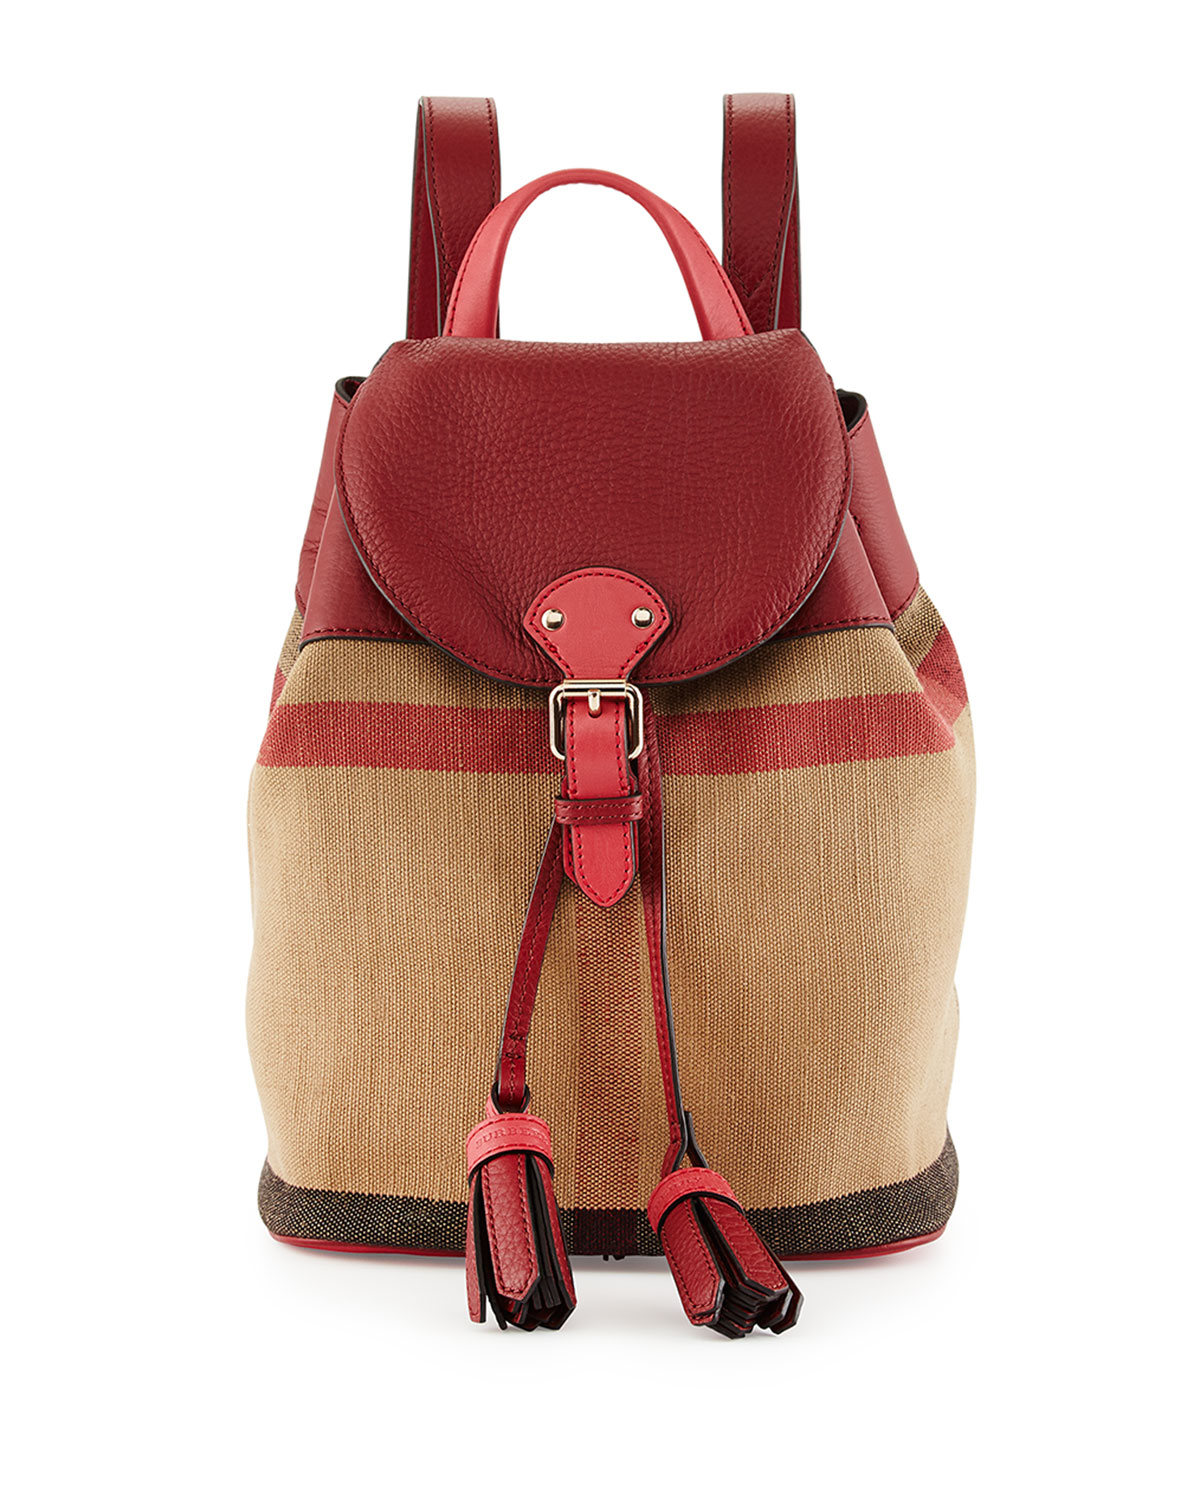 Lyst - Burberry Mini Check Canvas Backpack in Natural